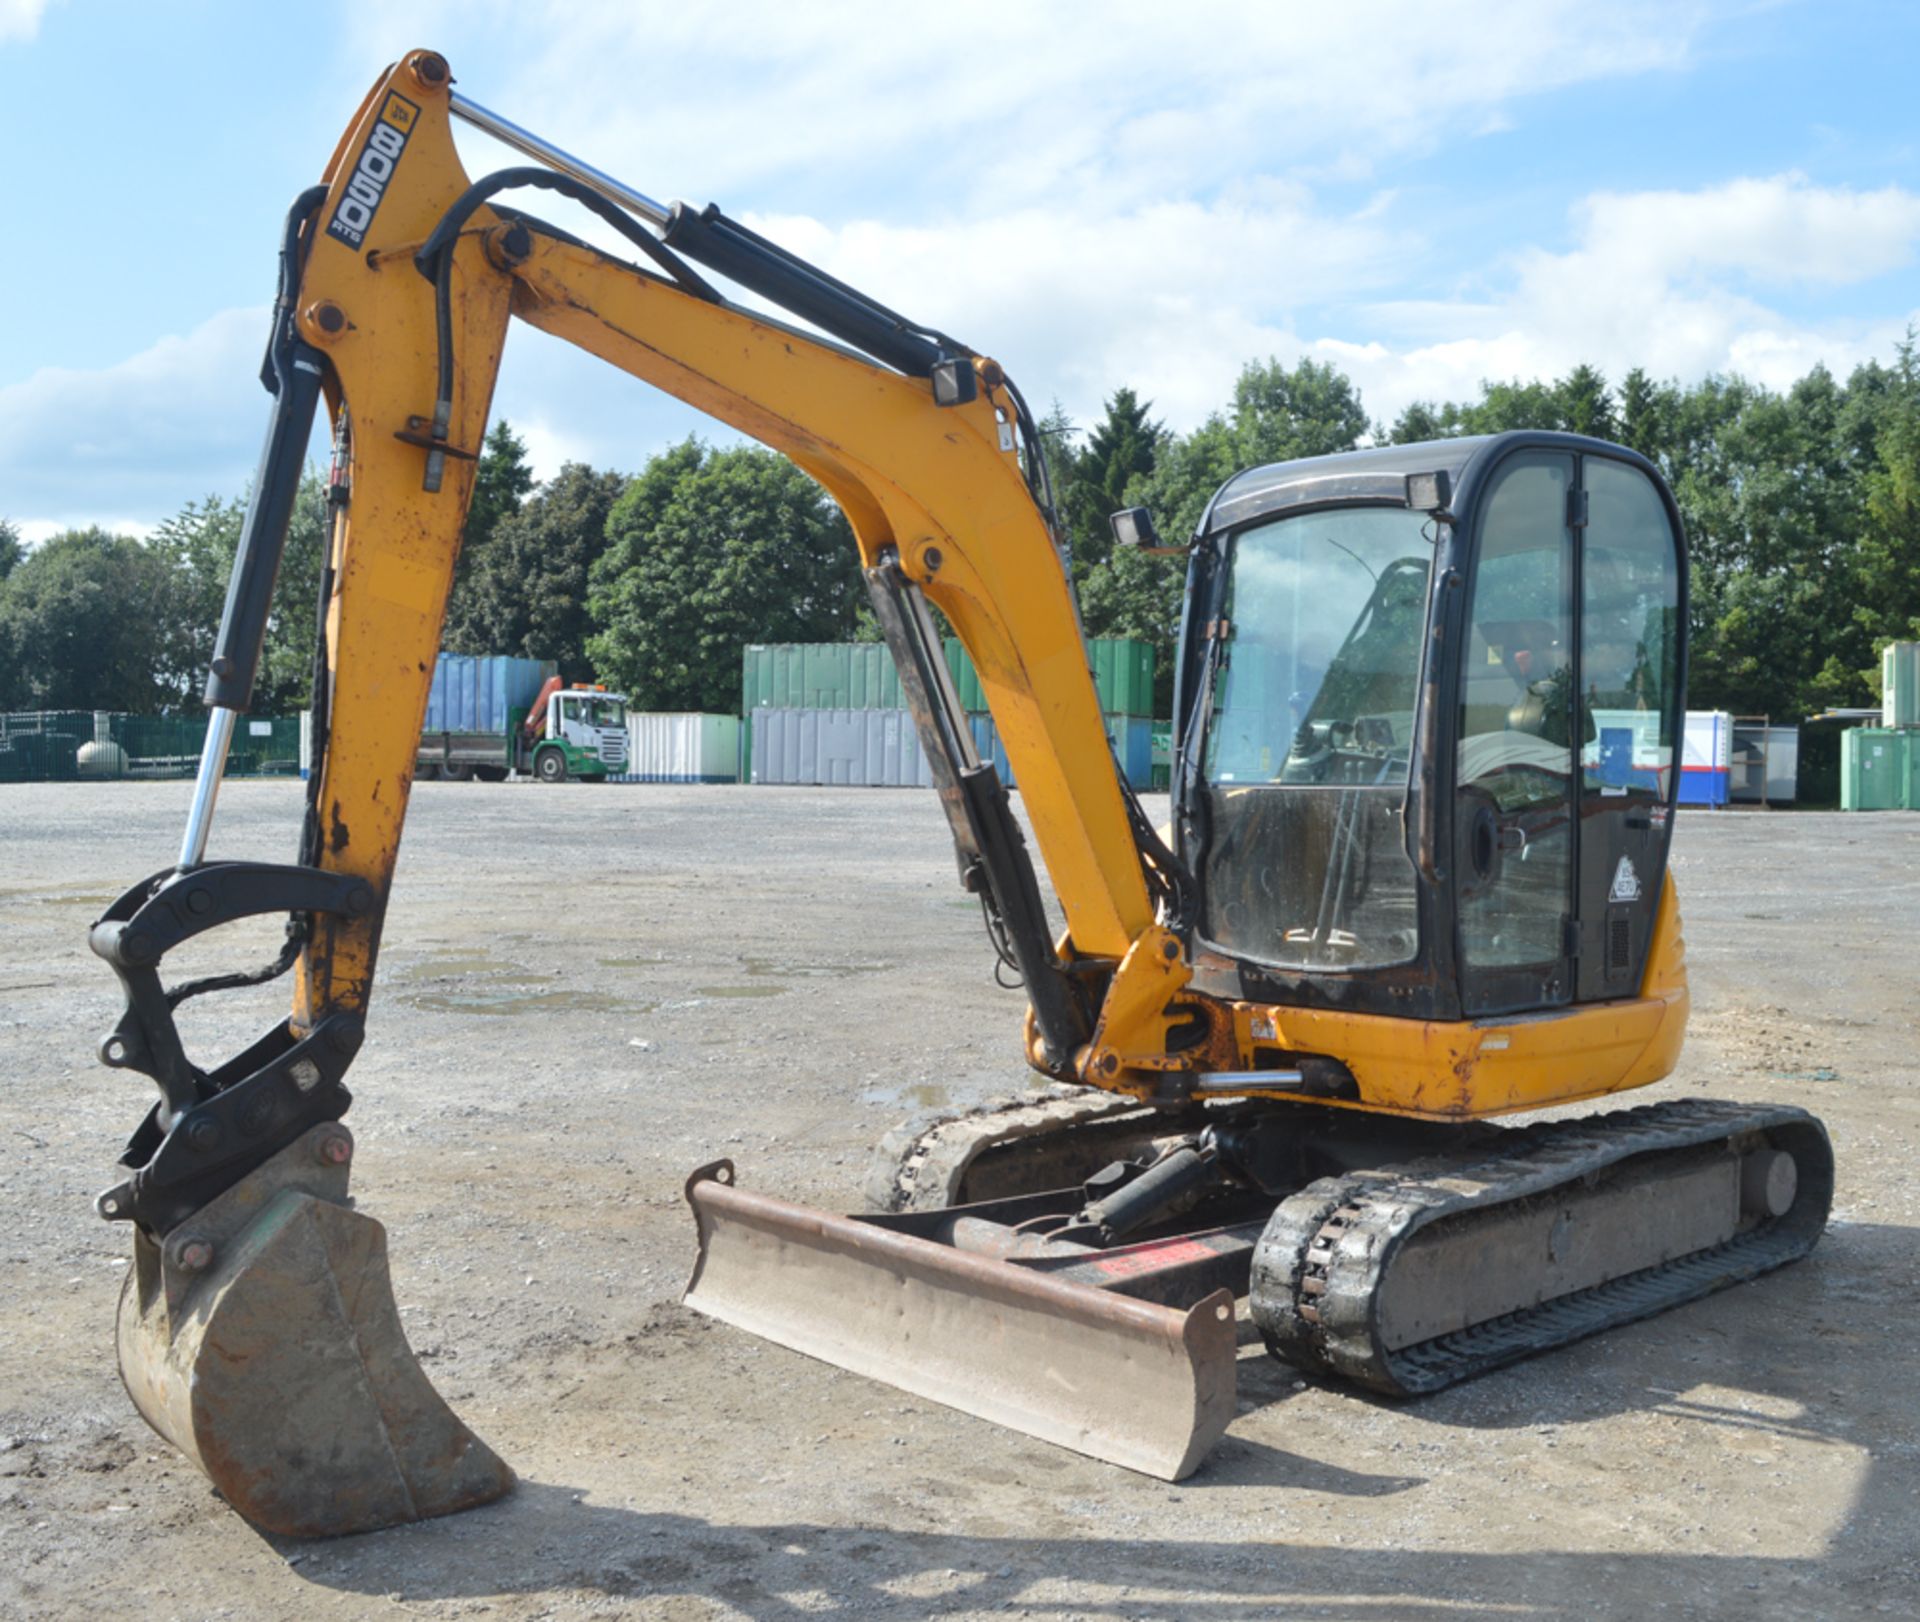 JCB 8050 RTS 5 tonne rubber tracked excavator  Year: 2011 S/N: 01741645 Recorded hours: 2052